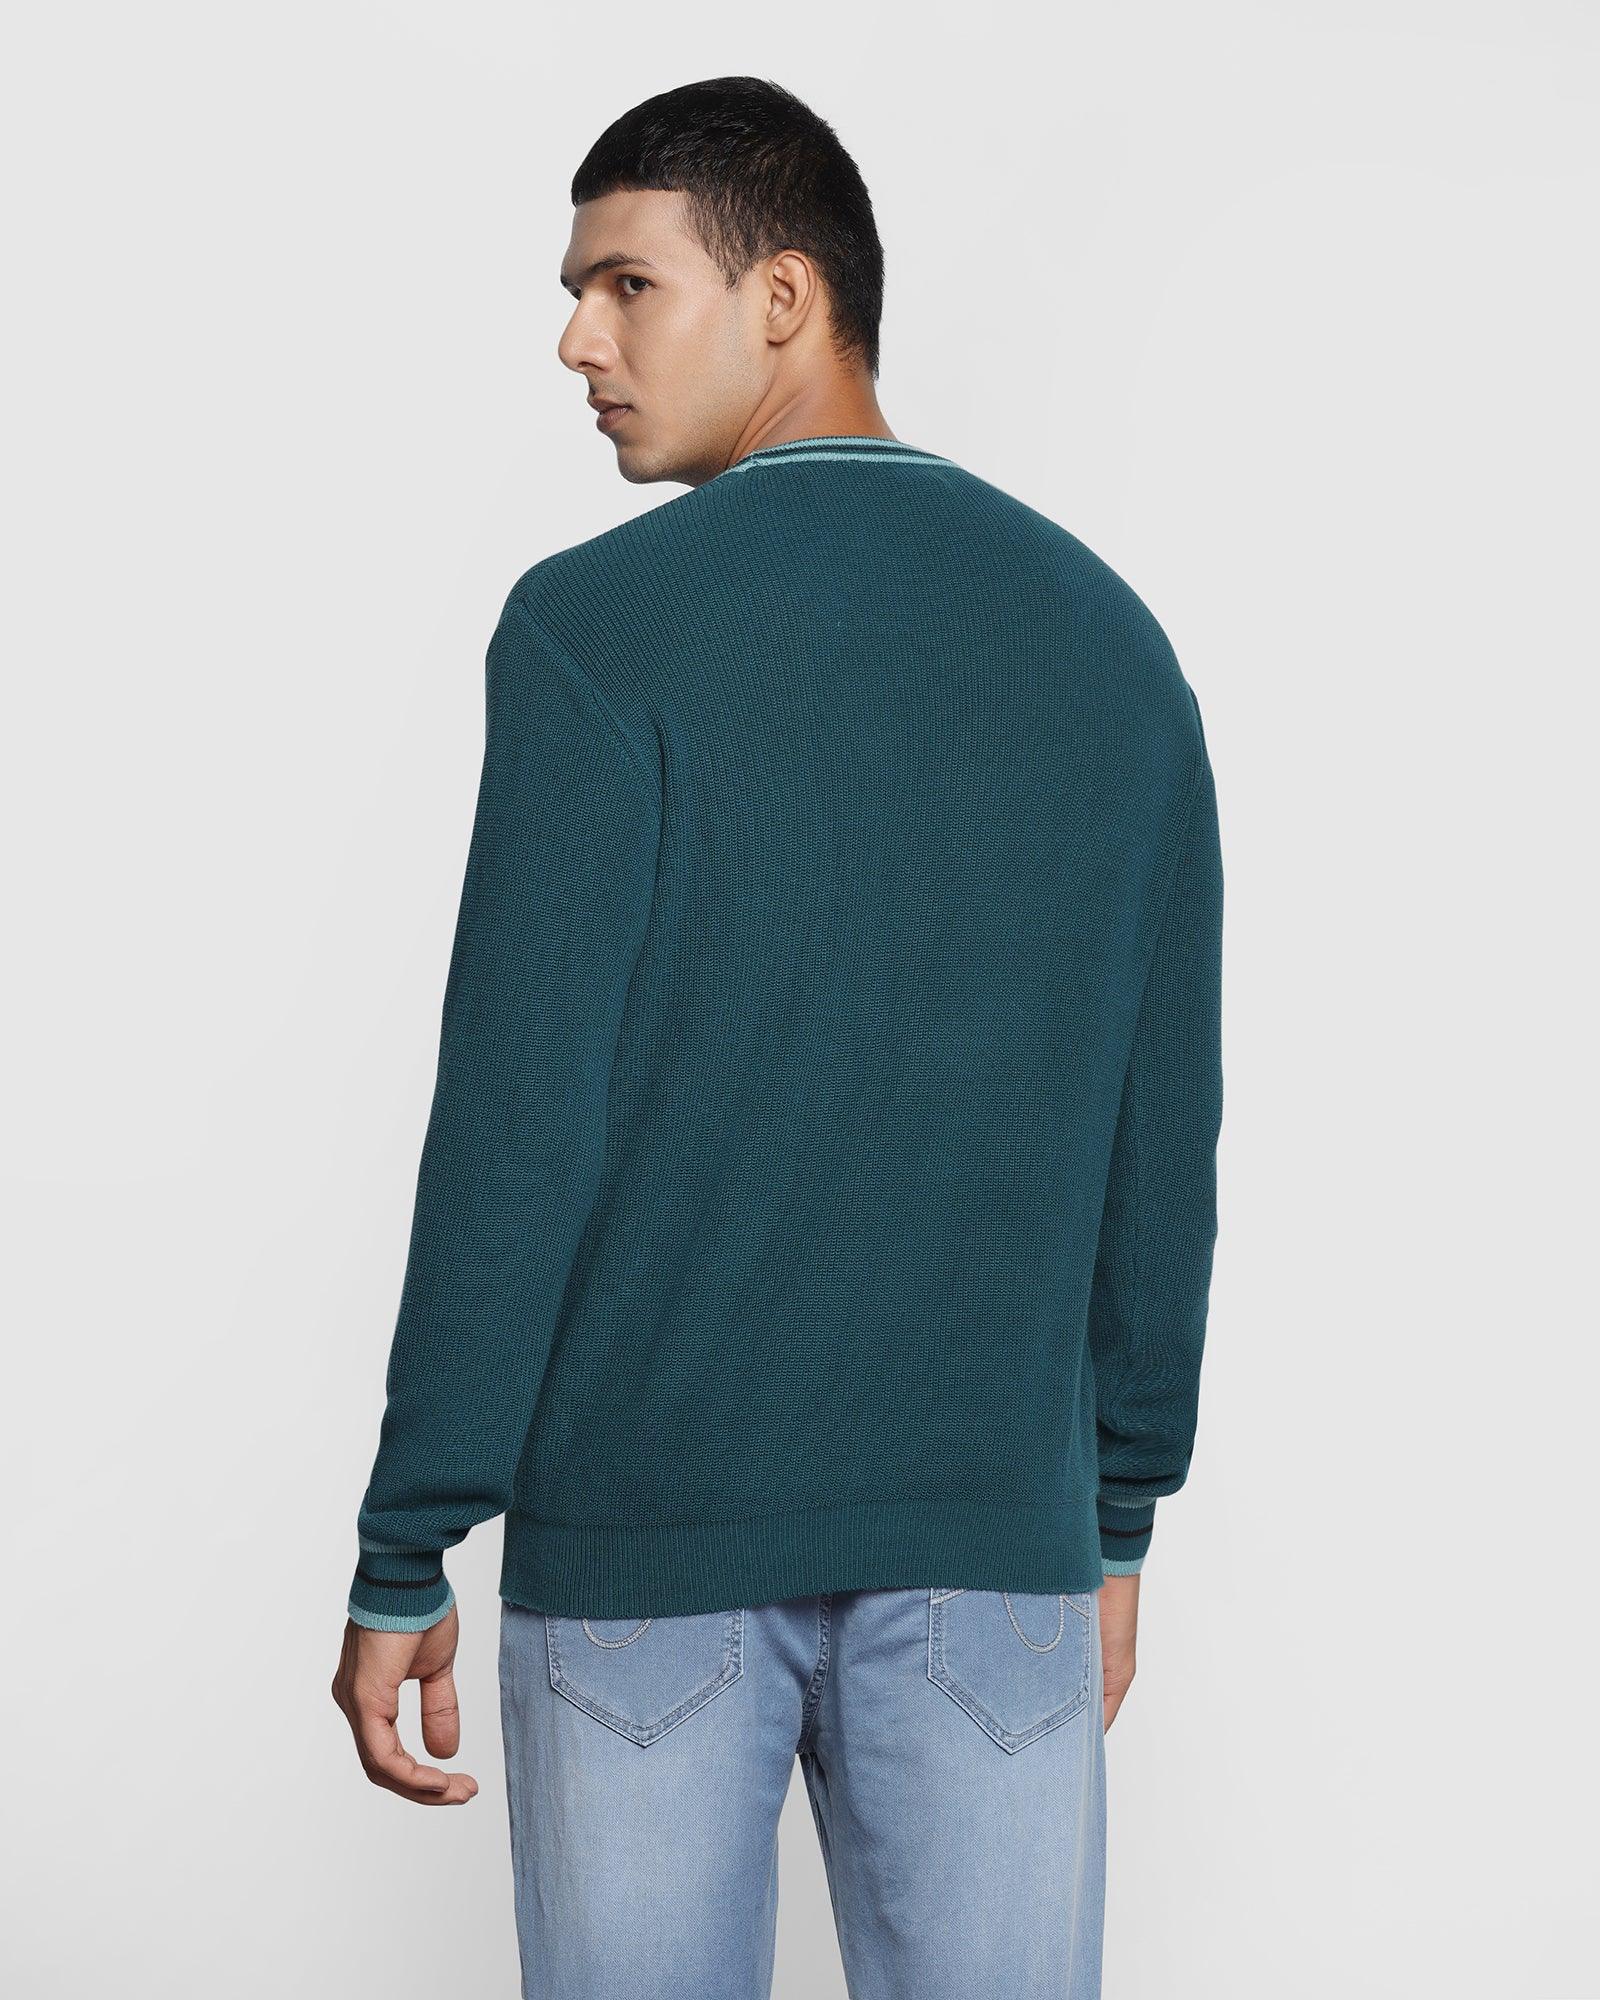 Crew Neck Teal Green Solid Sweater - Bonne